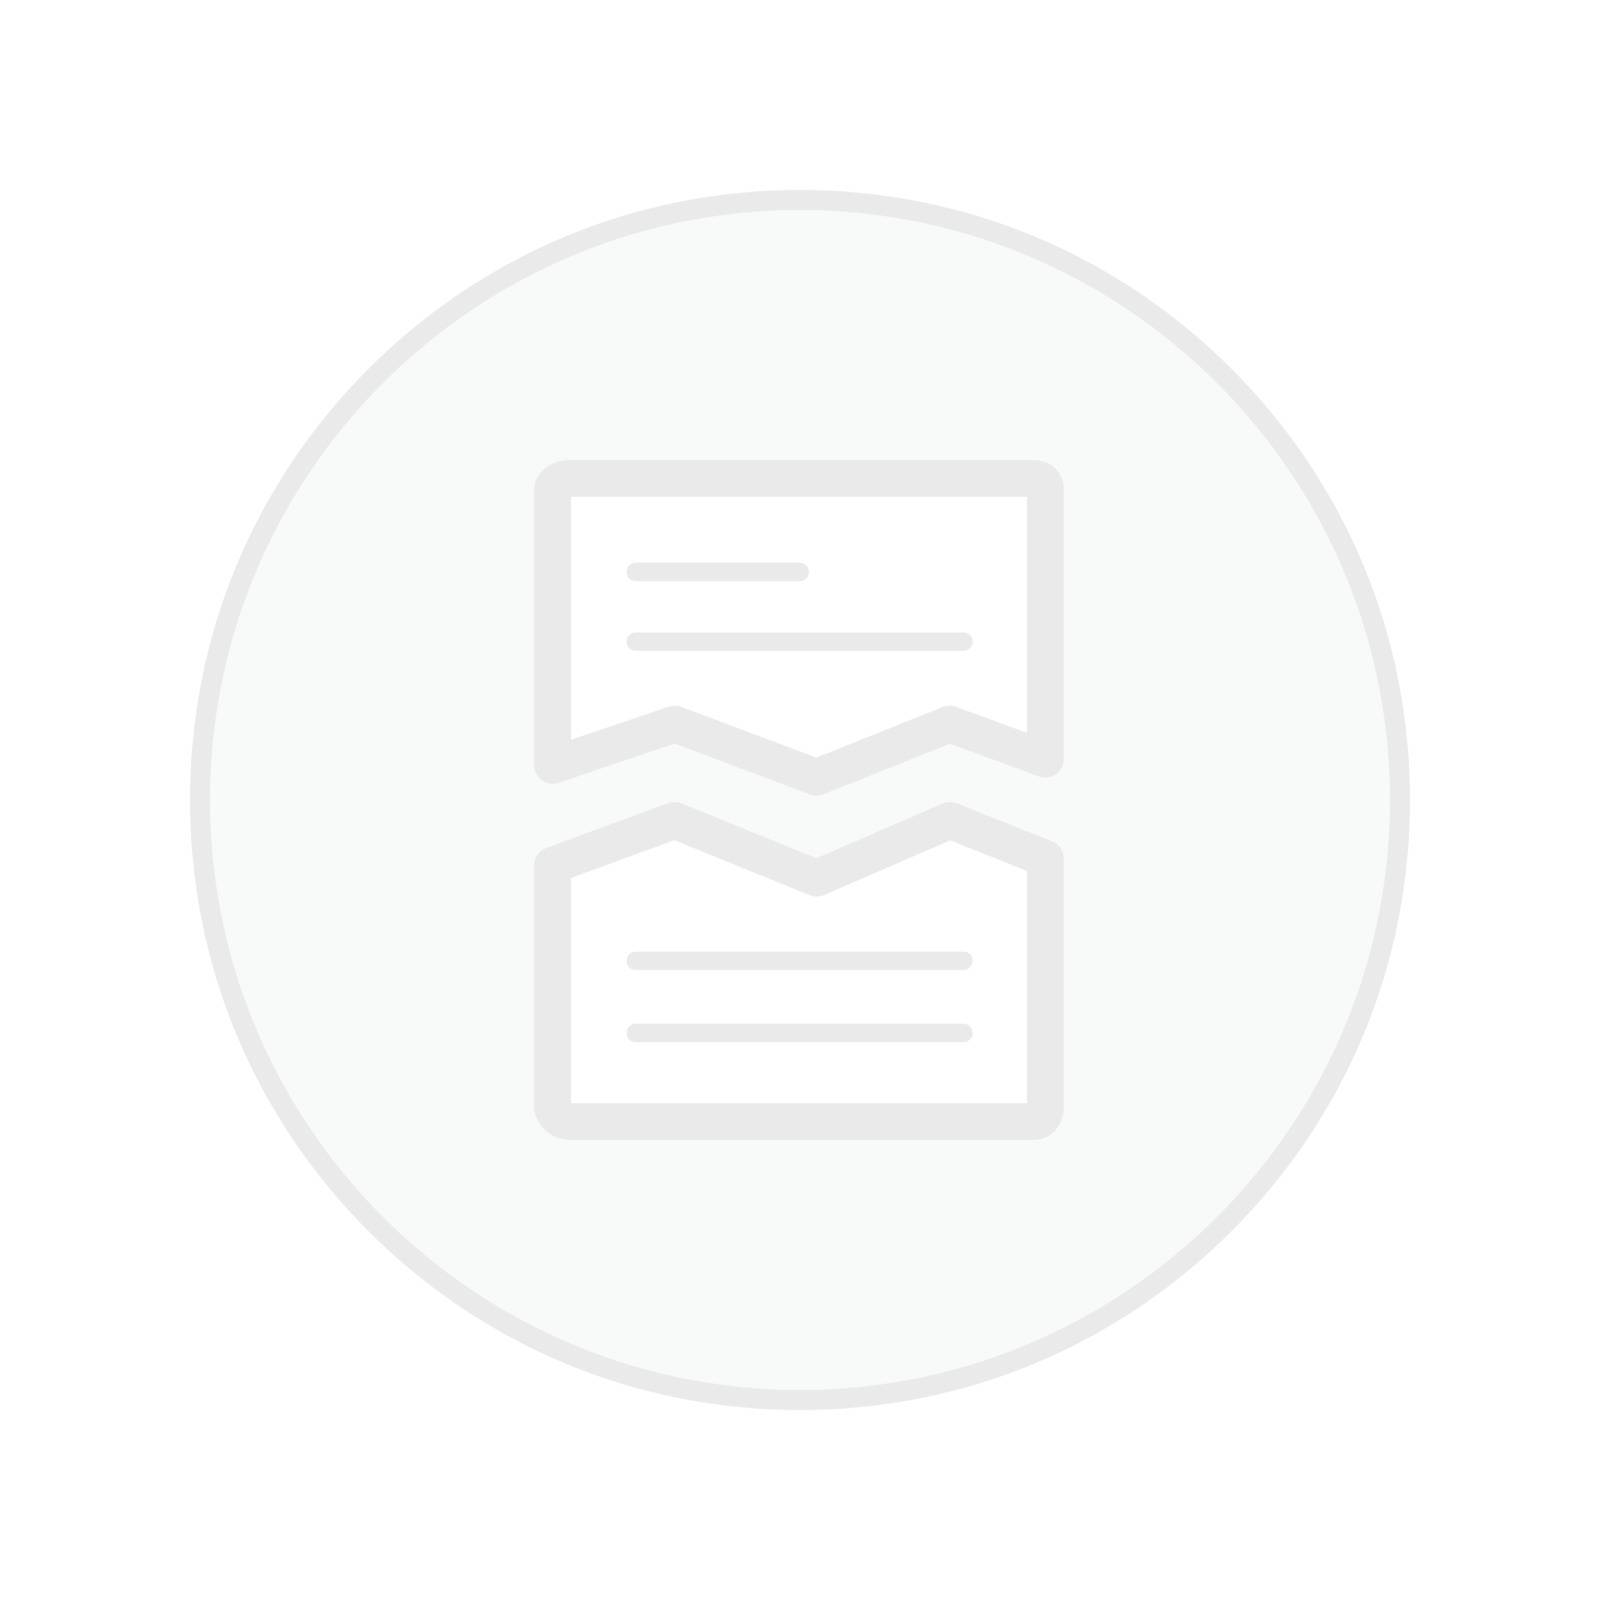 office paper torn white button icon by PAPAGraph